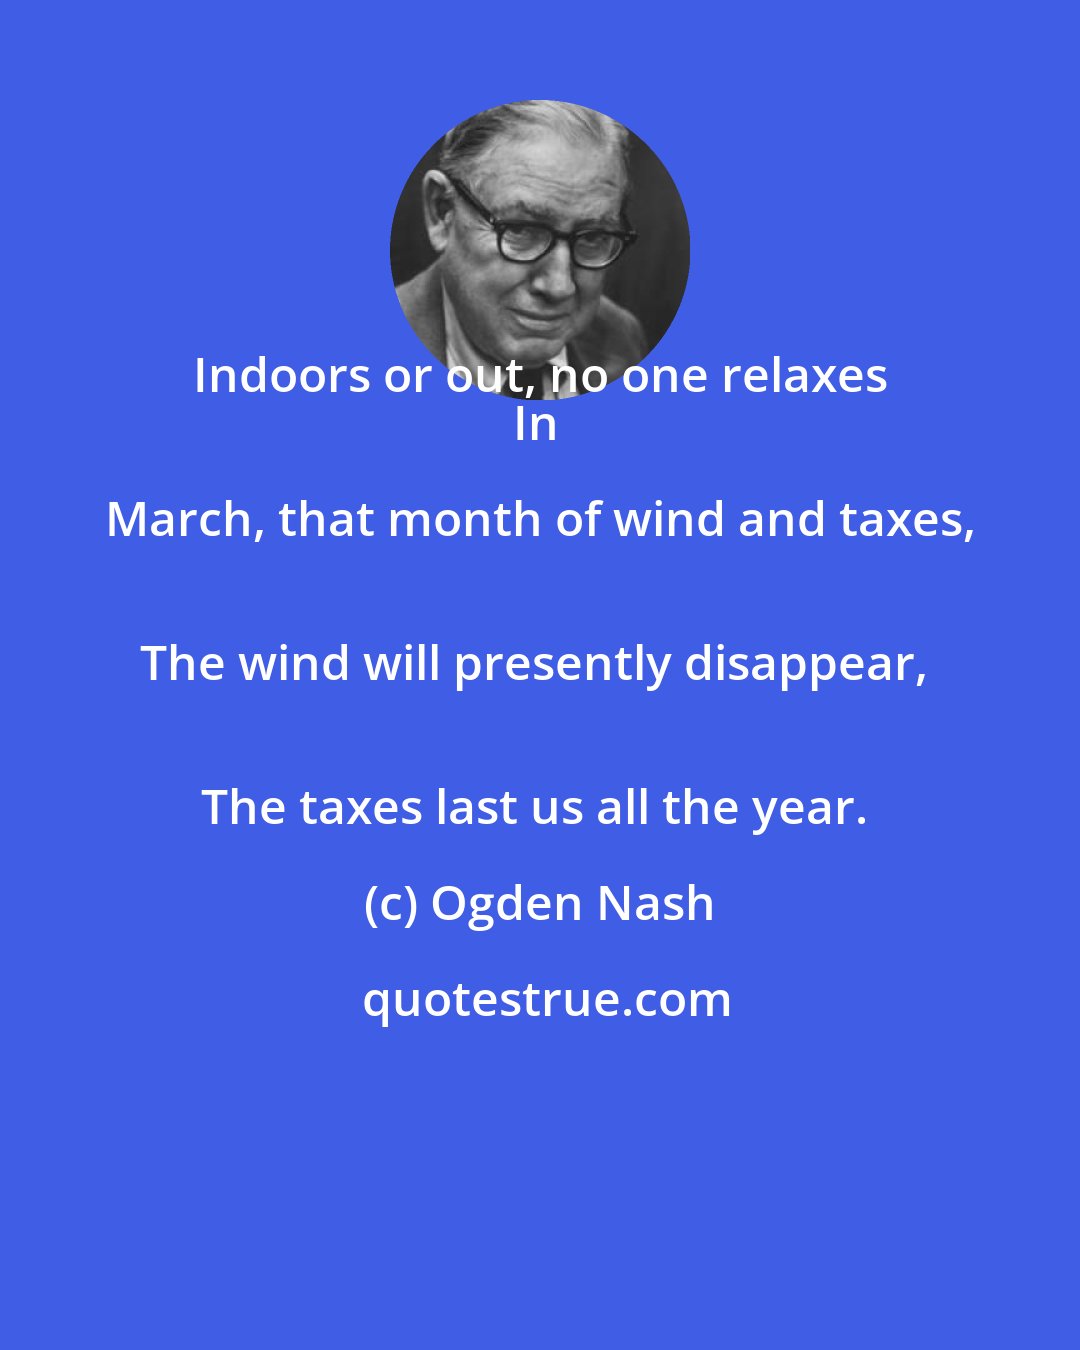 Ogden Nash: Indoors or out, no one relaxes 
In March, that month of wind and taxes, 
The wind will presently disappear, 
The taxes last us all the year.